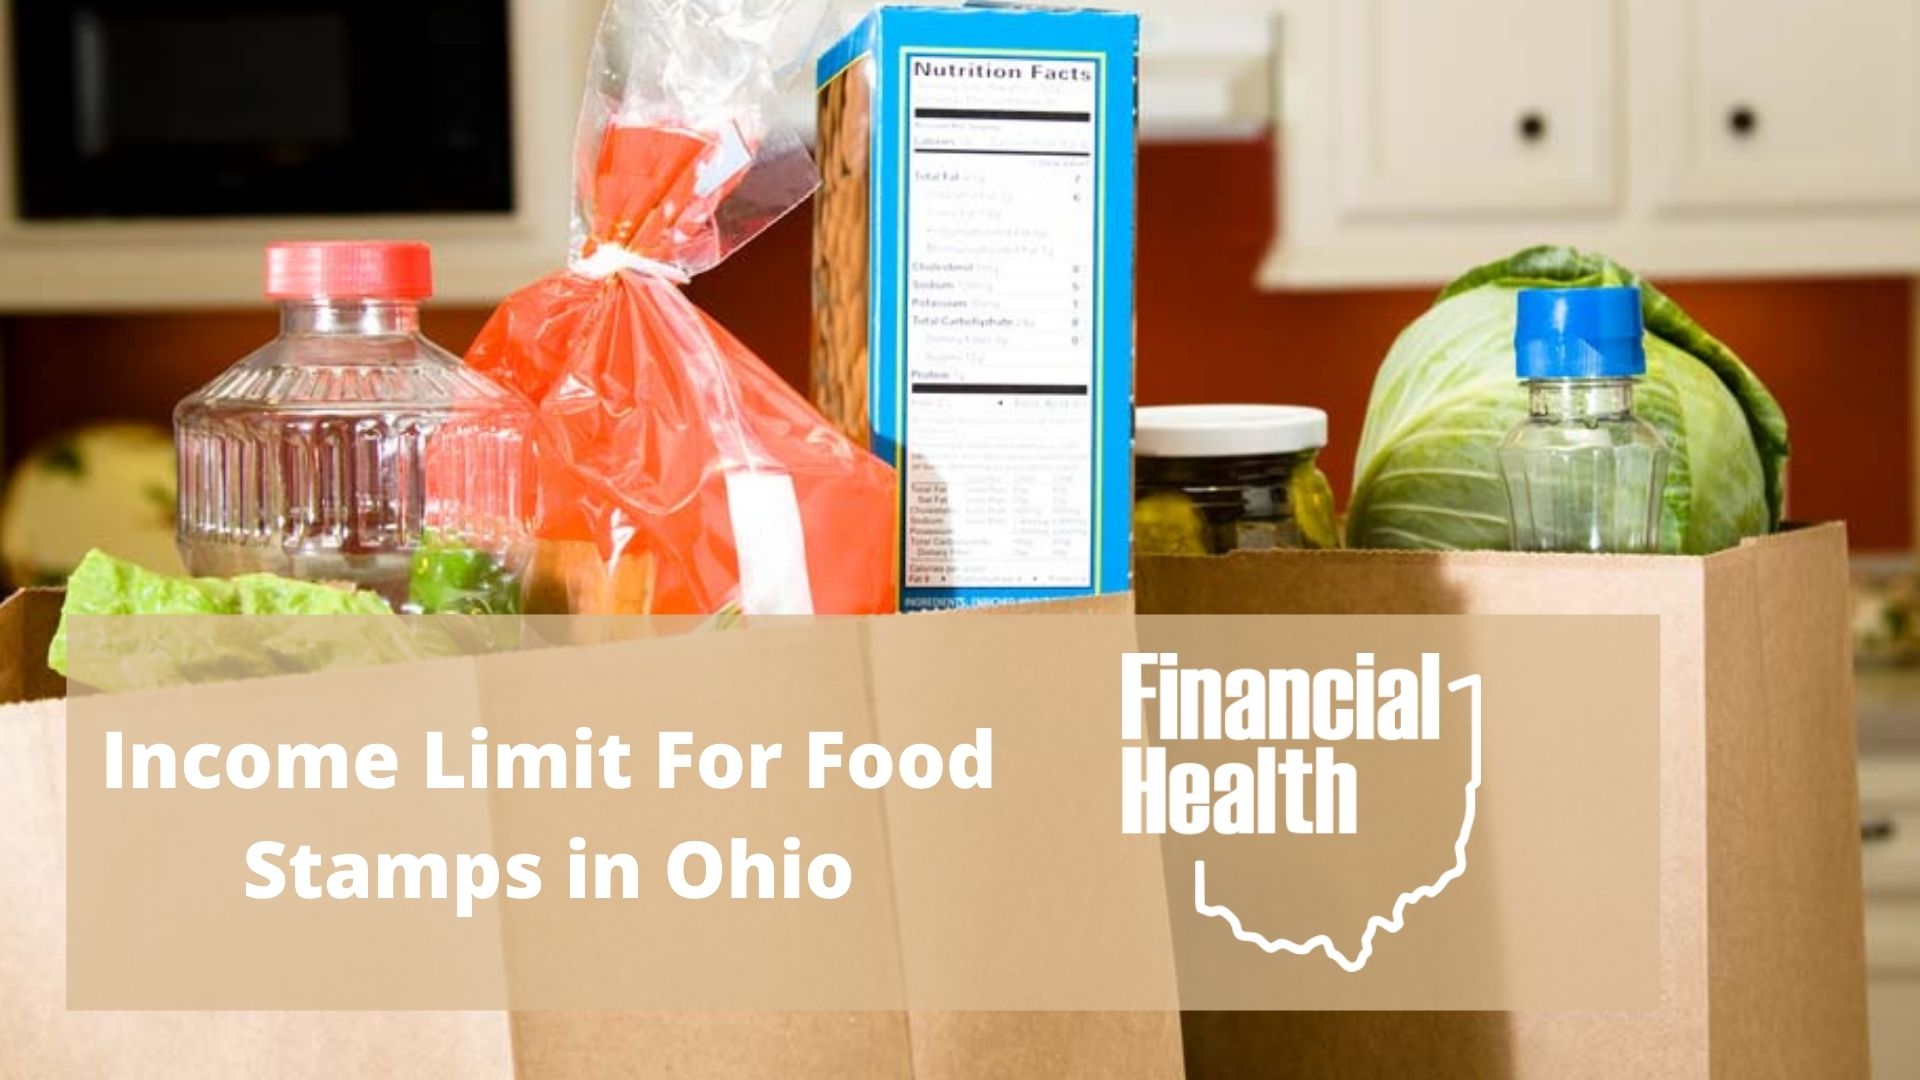 Ohio Gguidelines for Food Stamps Financial Health of Ohio